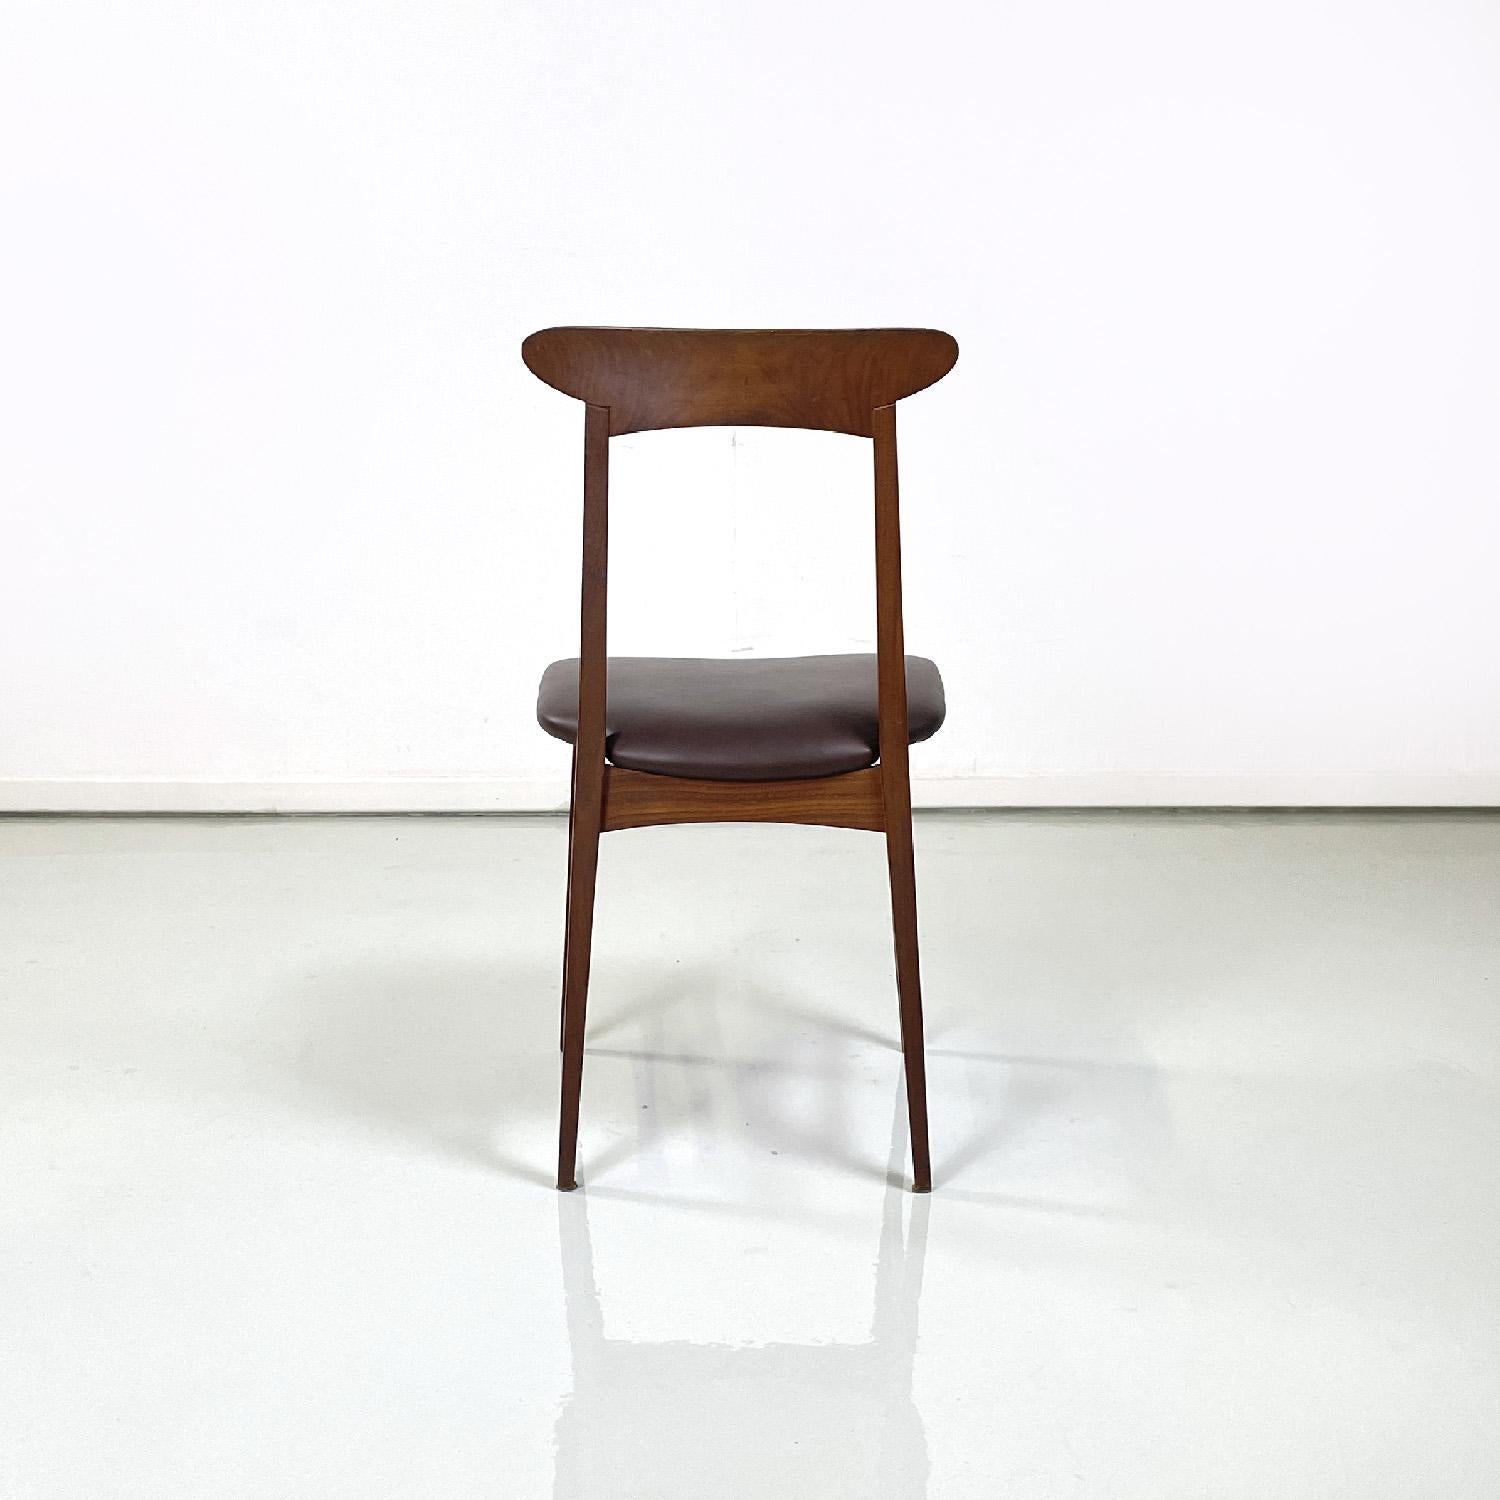 Mid-20th Century Danish mid-century modern wooden and brown leather chairs, 1950s For Sale